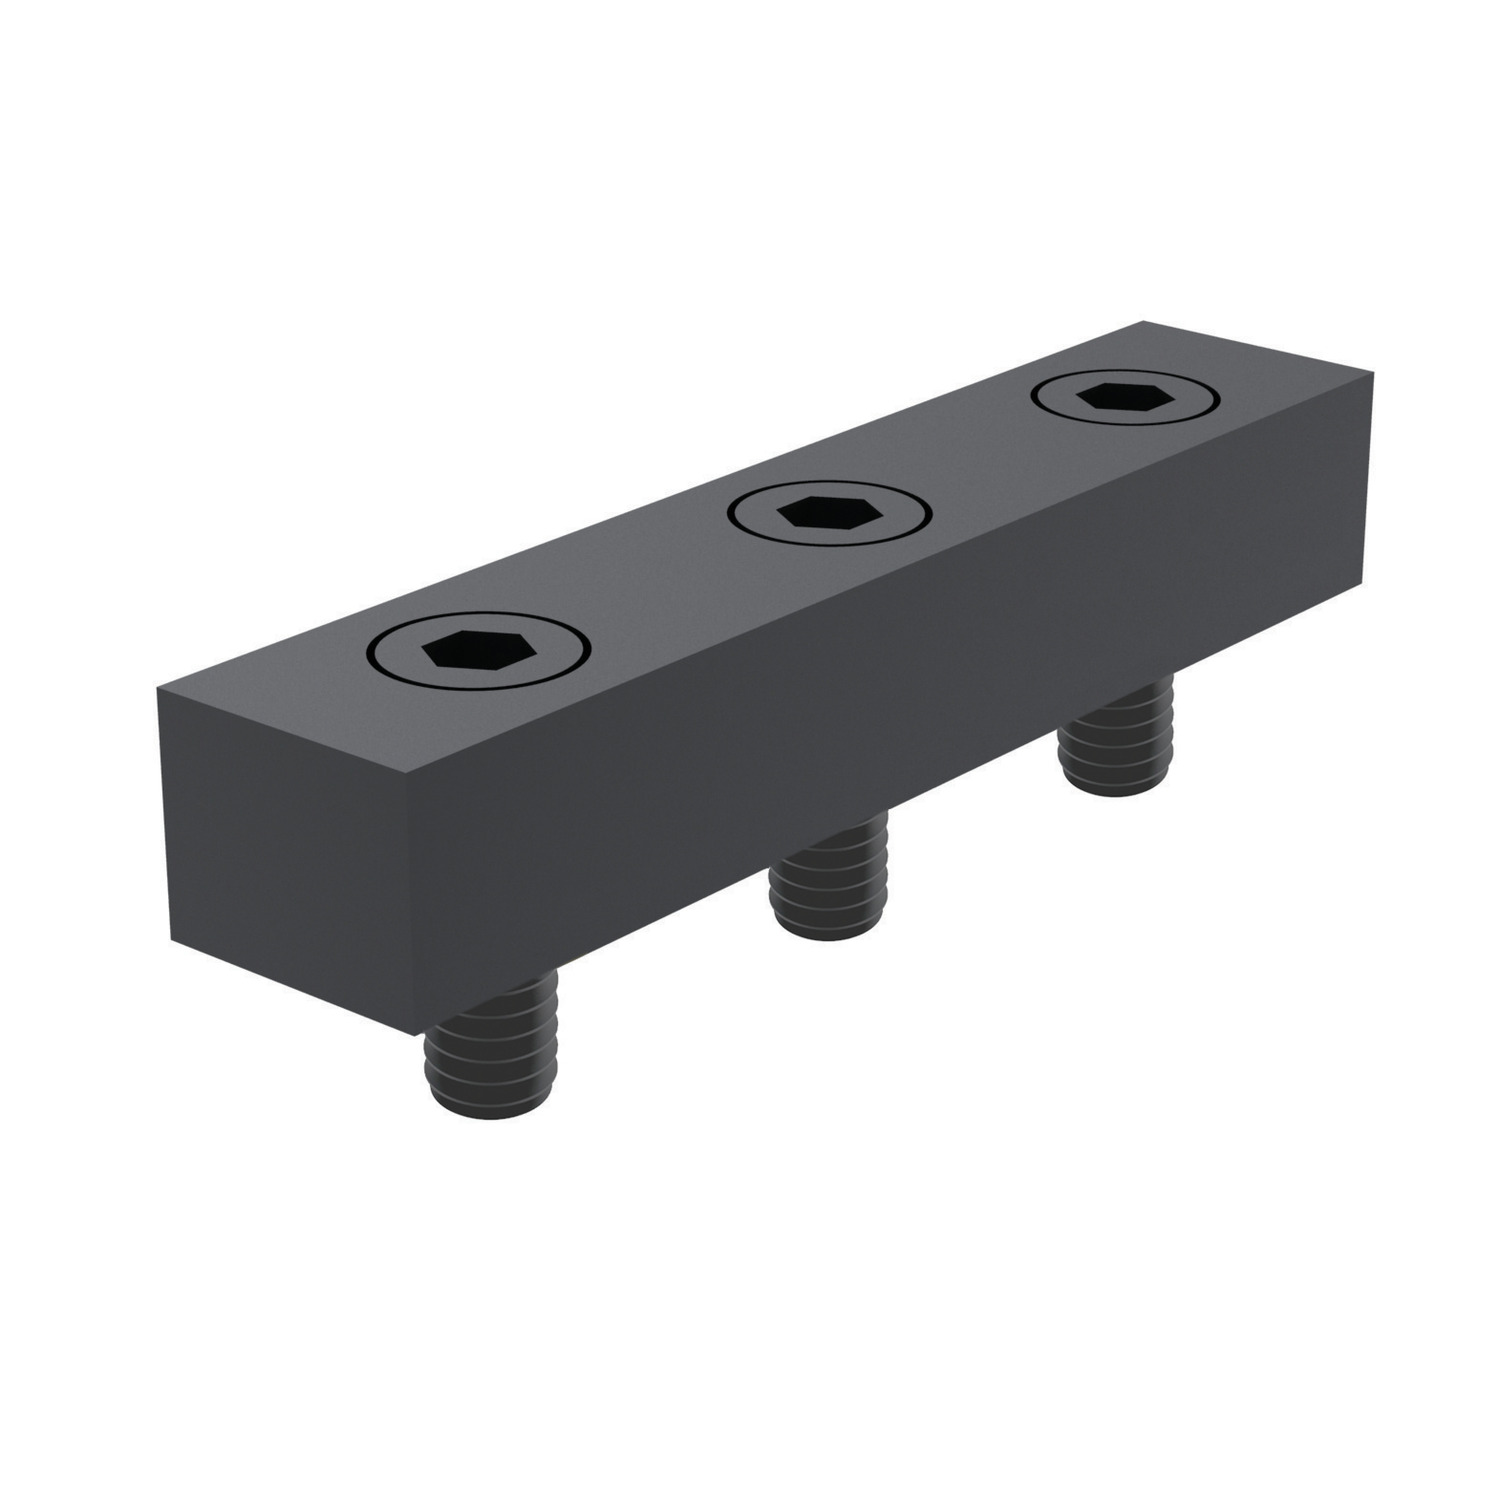 Product 17403, Locating Rails for fixturing / 